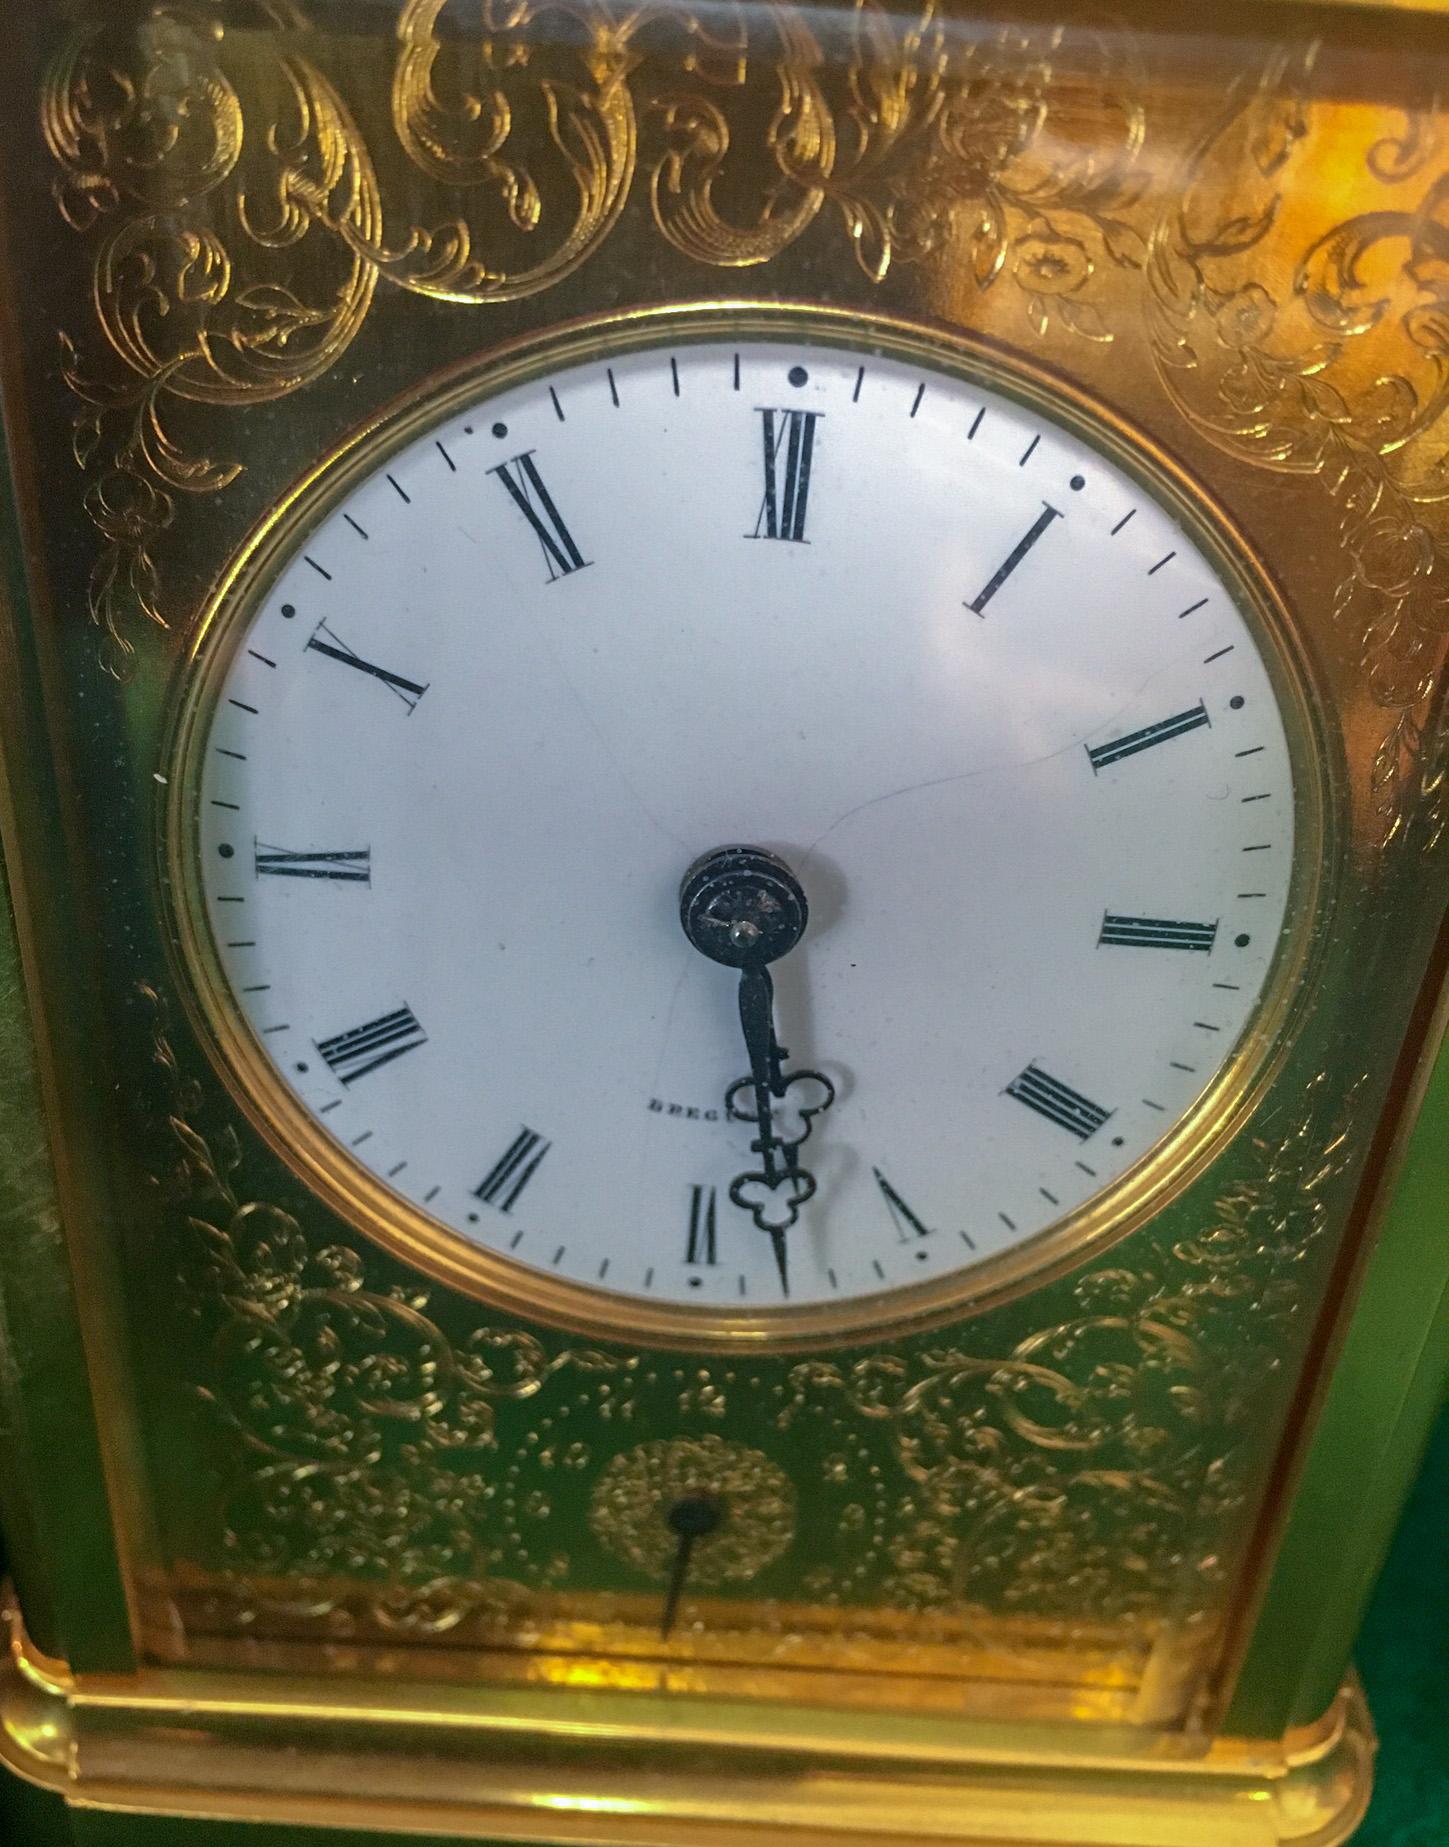 This incredible French grande and petite sonnerie striking carriage clock
by Breguet Neveu Compagnie à Paris, features:
Case: the gilded brass case with rectangular top and
folding handle over an oval beveled glass escapement
aperture and push